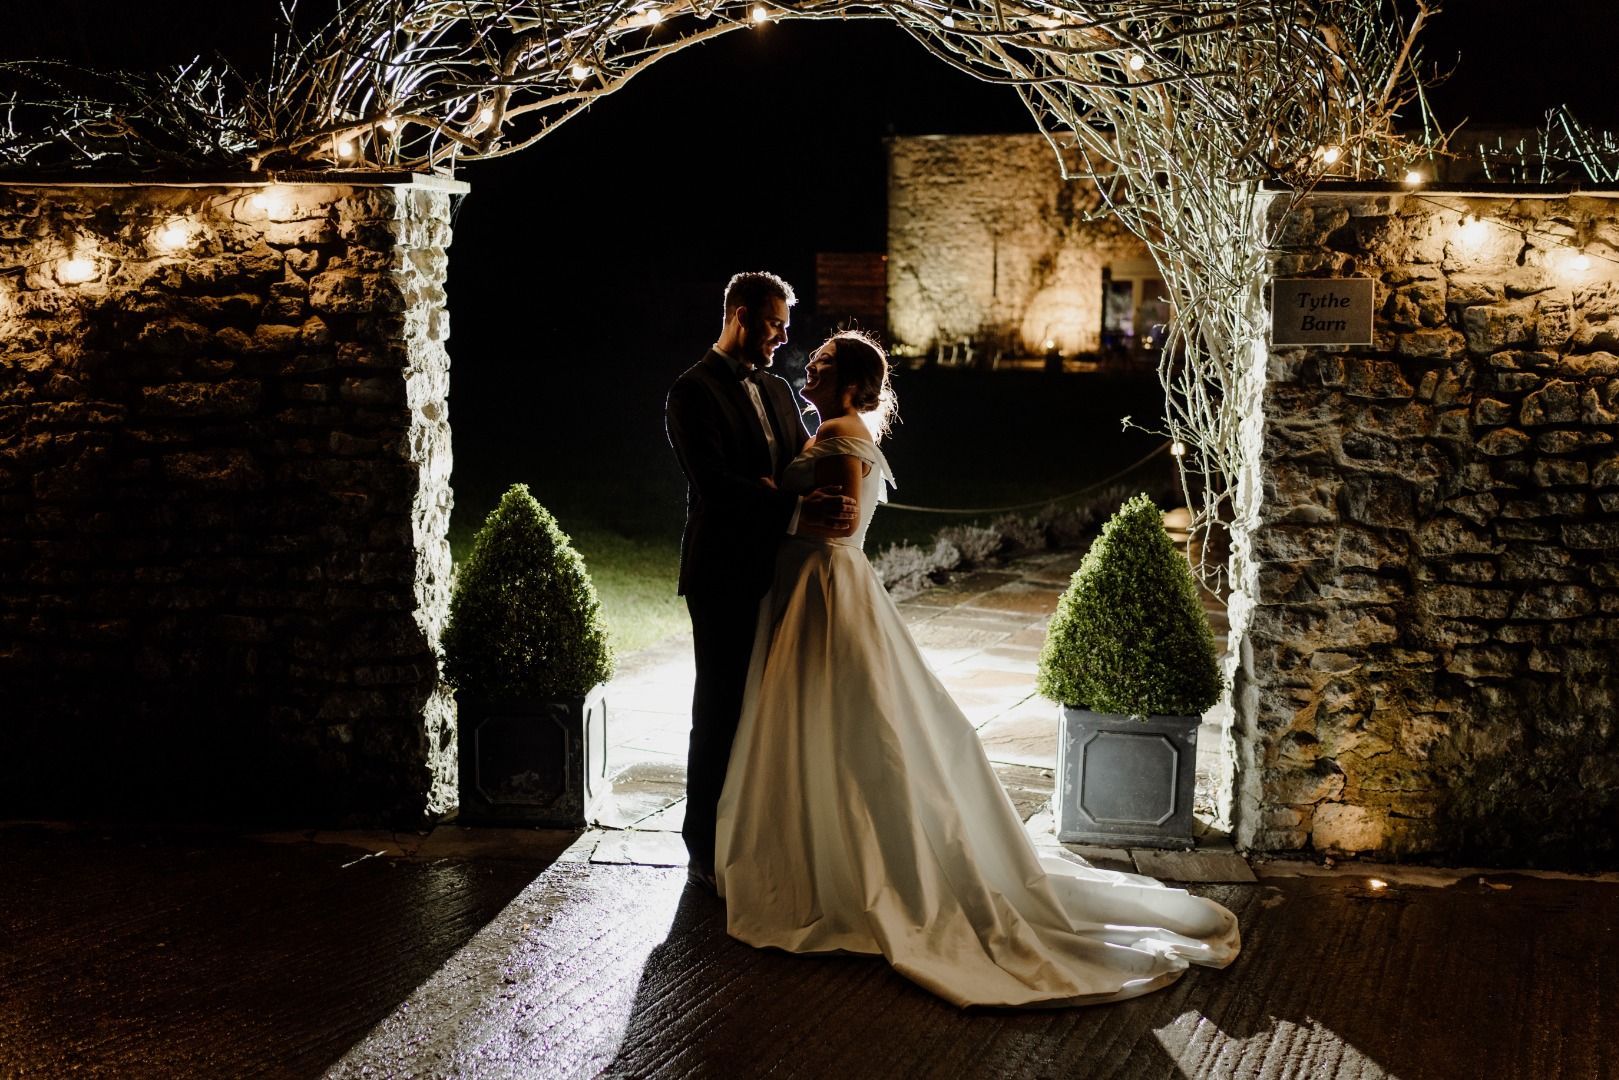 A bride and groom are standing under an archway at night.